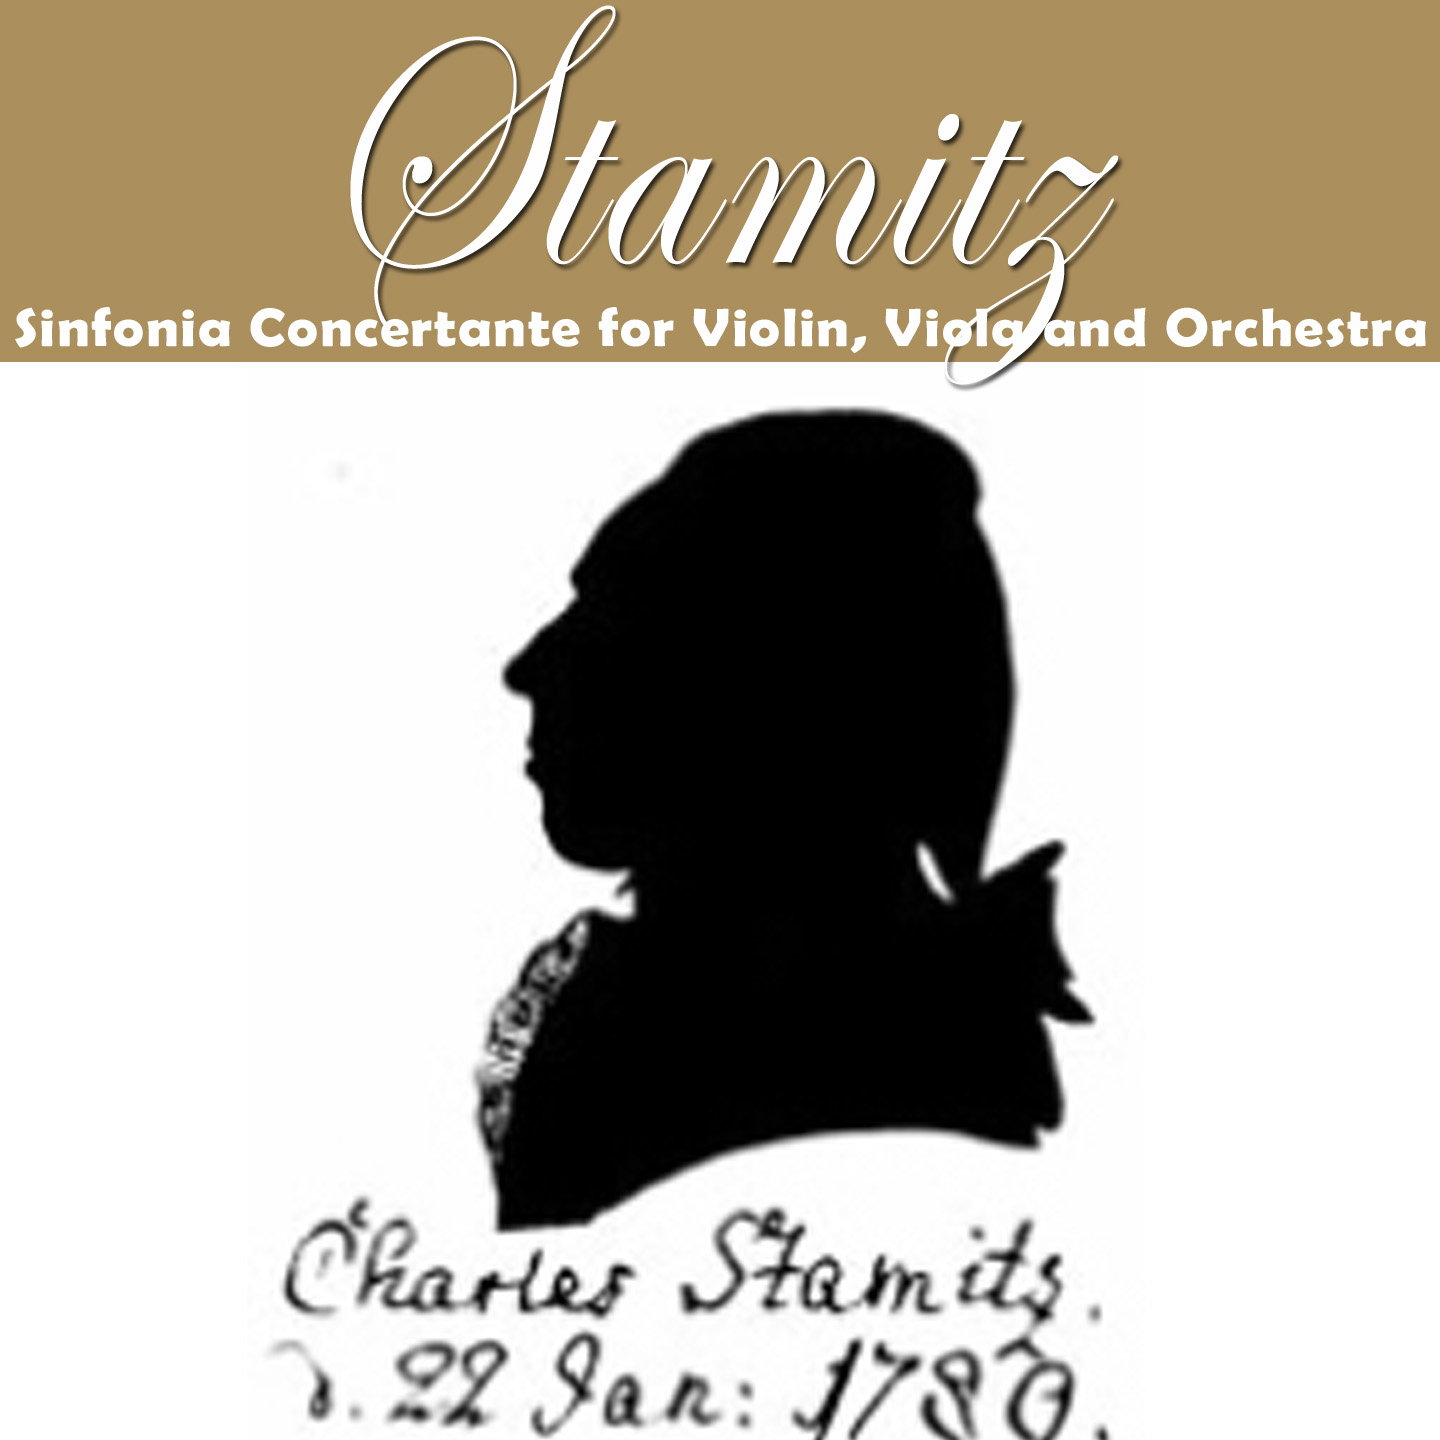 Stamitz: Sinfonia Concertante for Violin, Viola and Orchestra